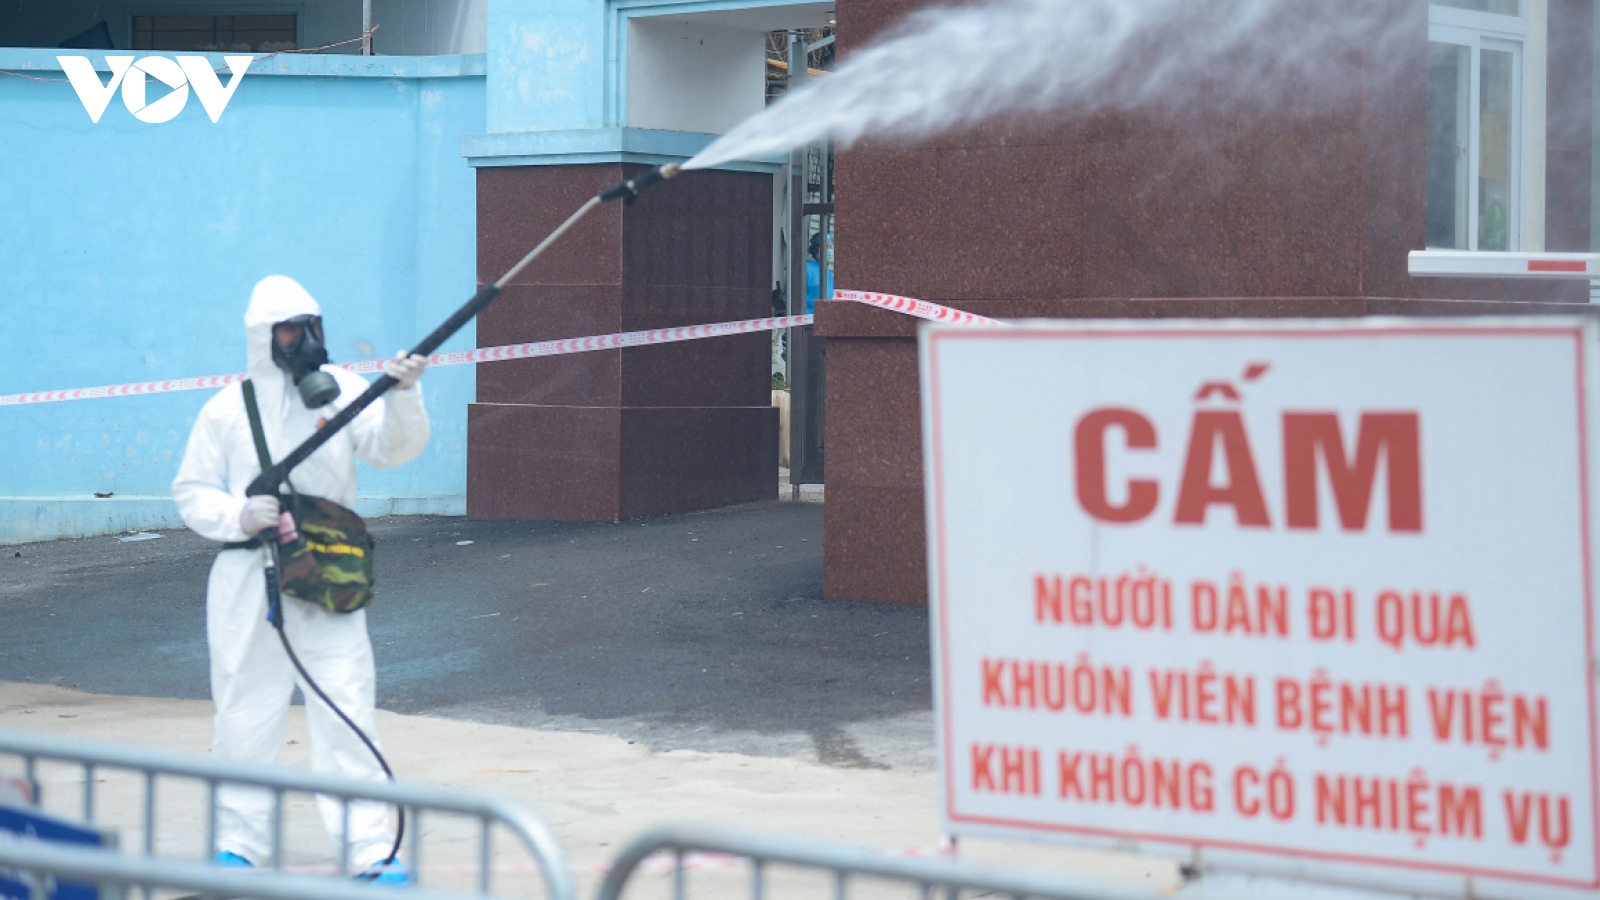 Military forces spray disinfectant at K Hospital's Tan Trieu medical facility